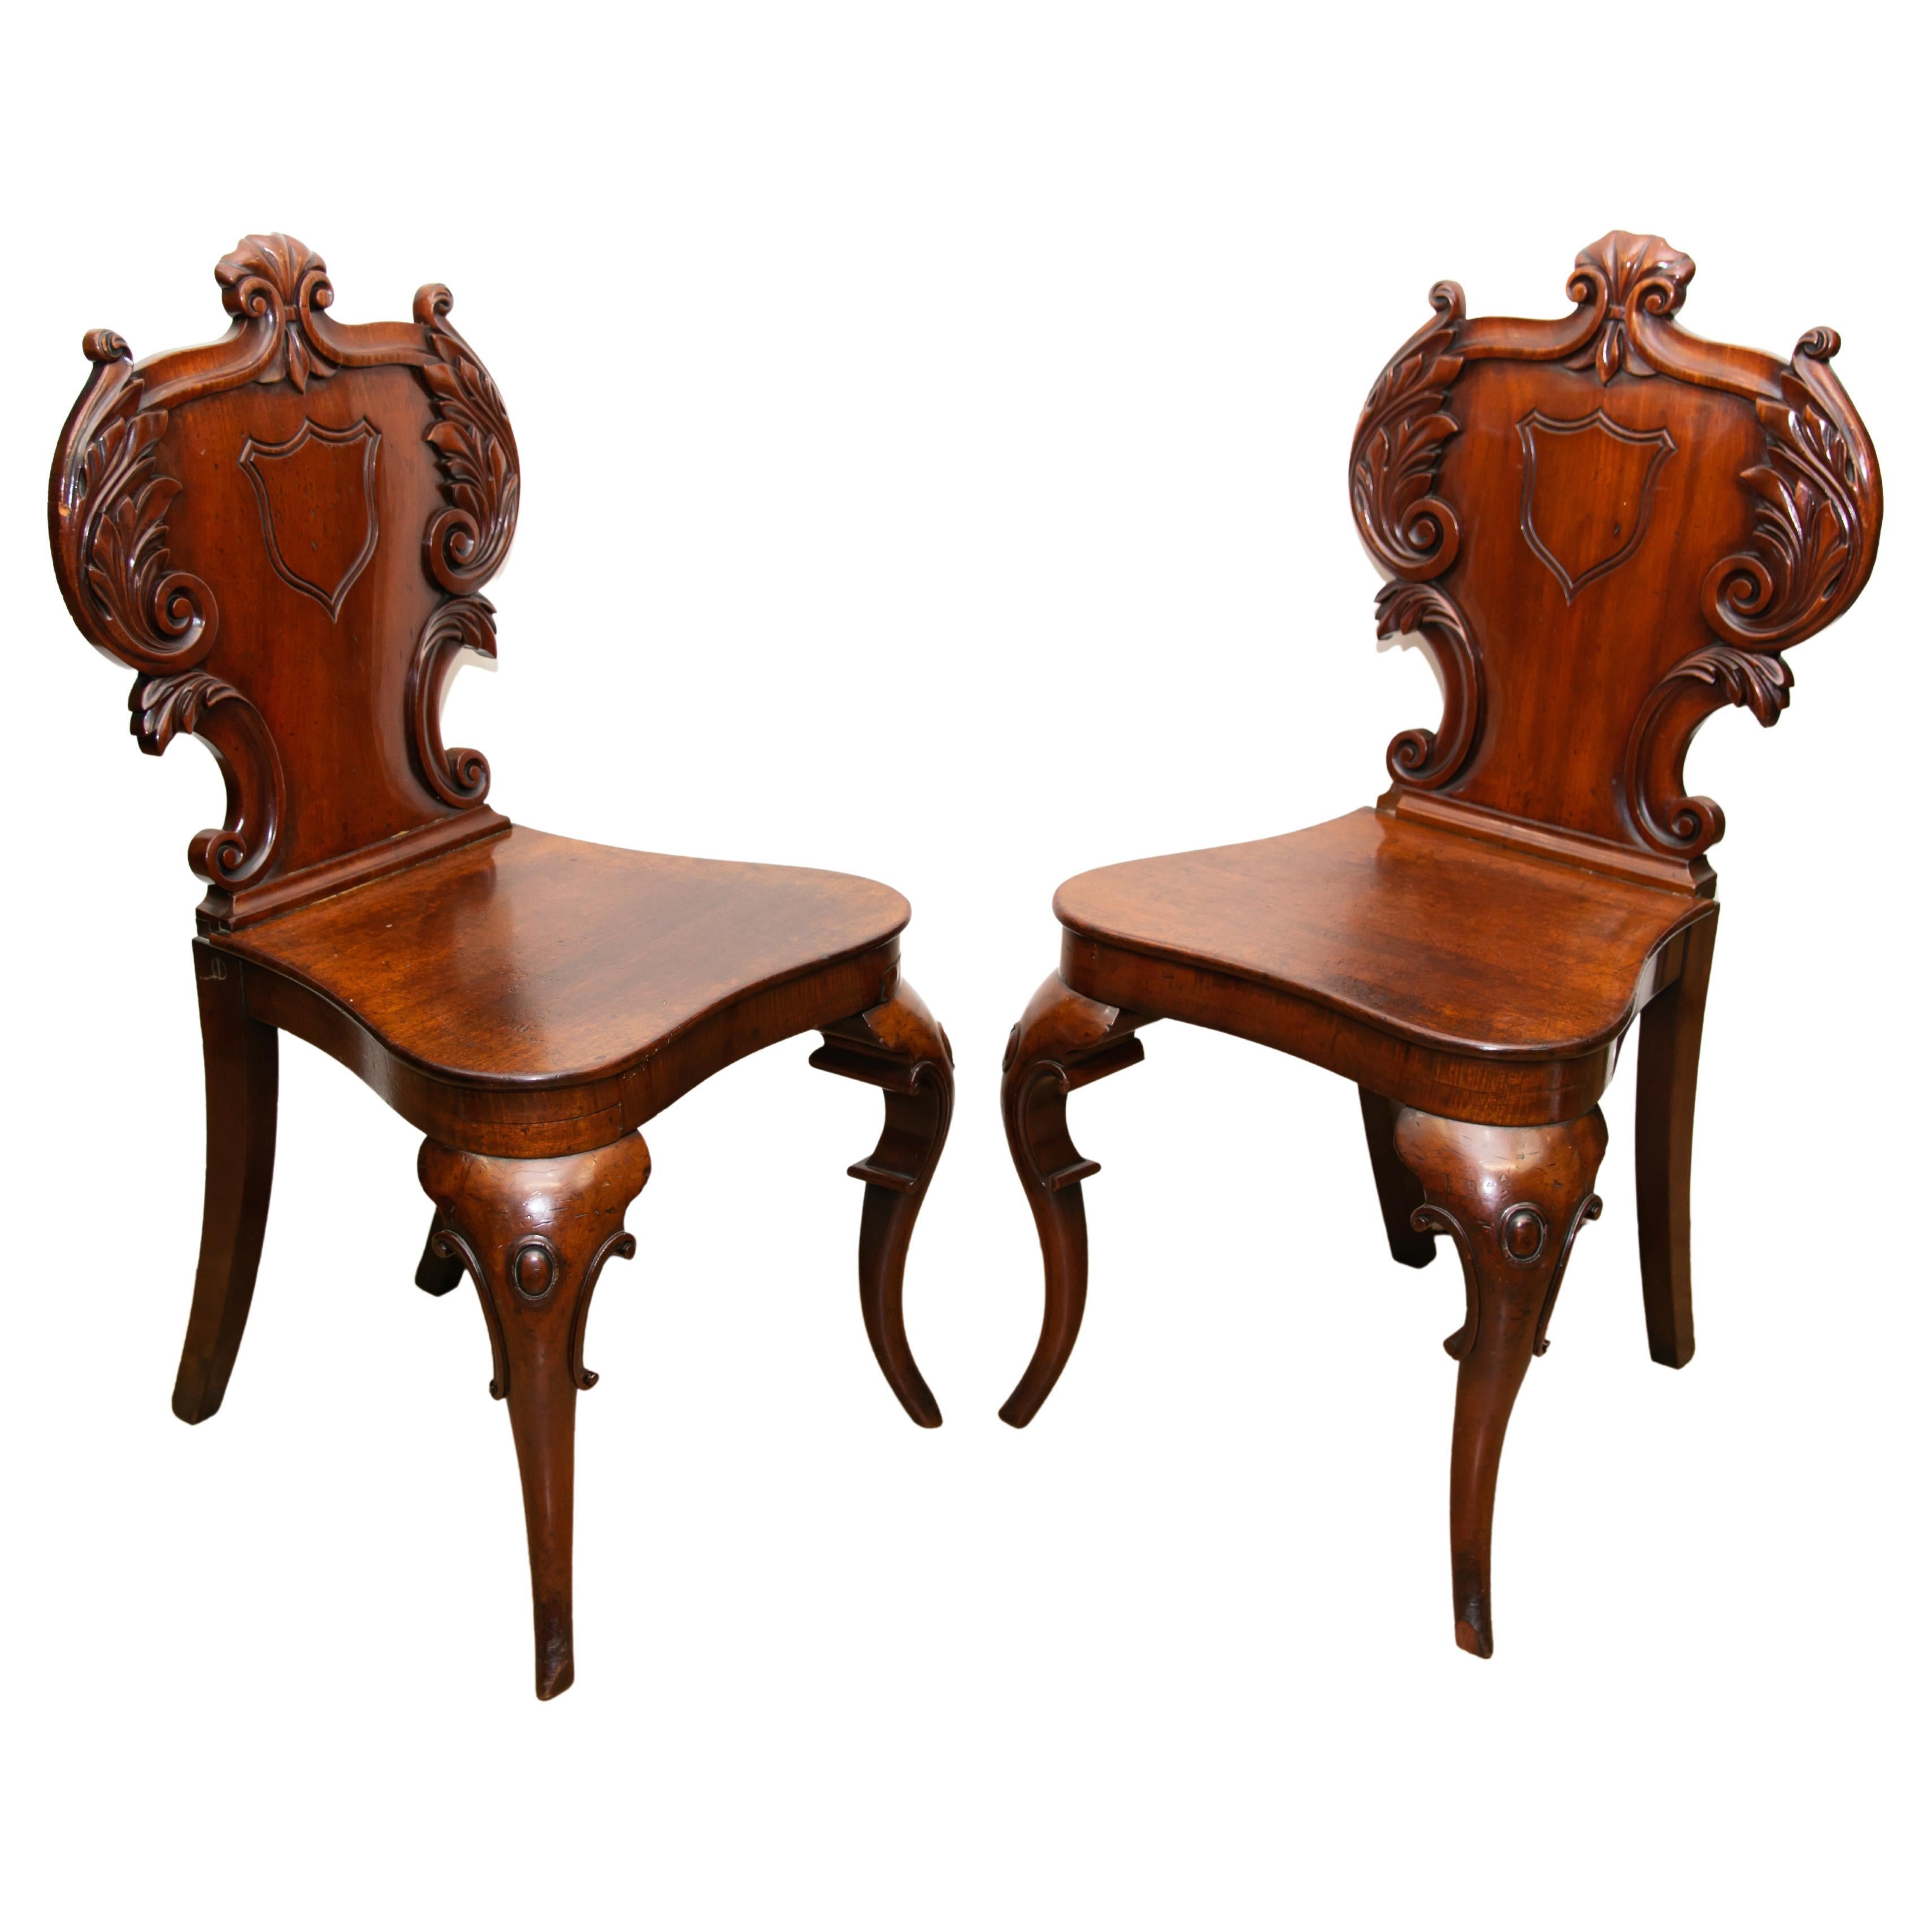 Pair Victorian Hall Chairs, Antique 1840 Carved Seats